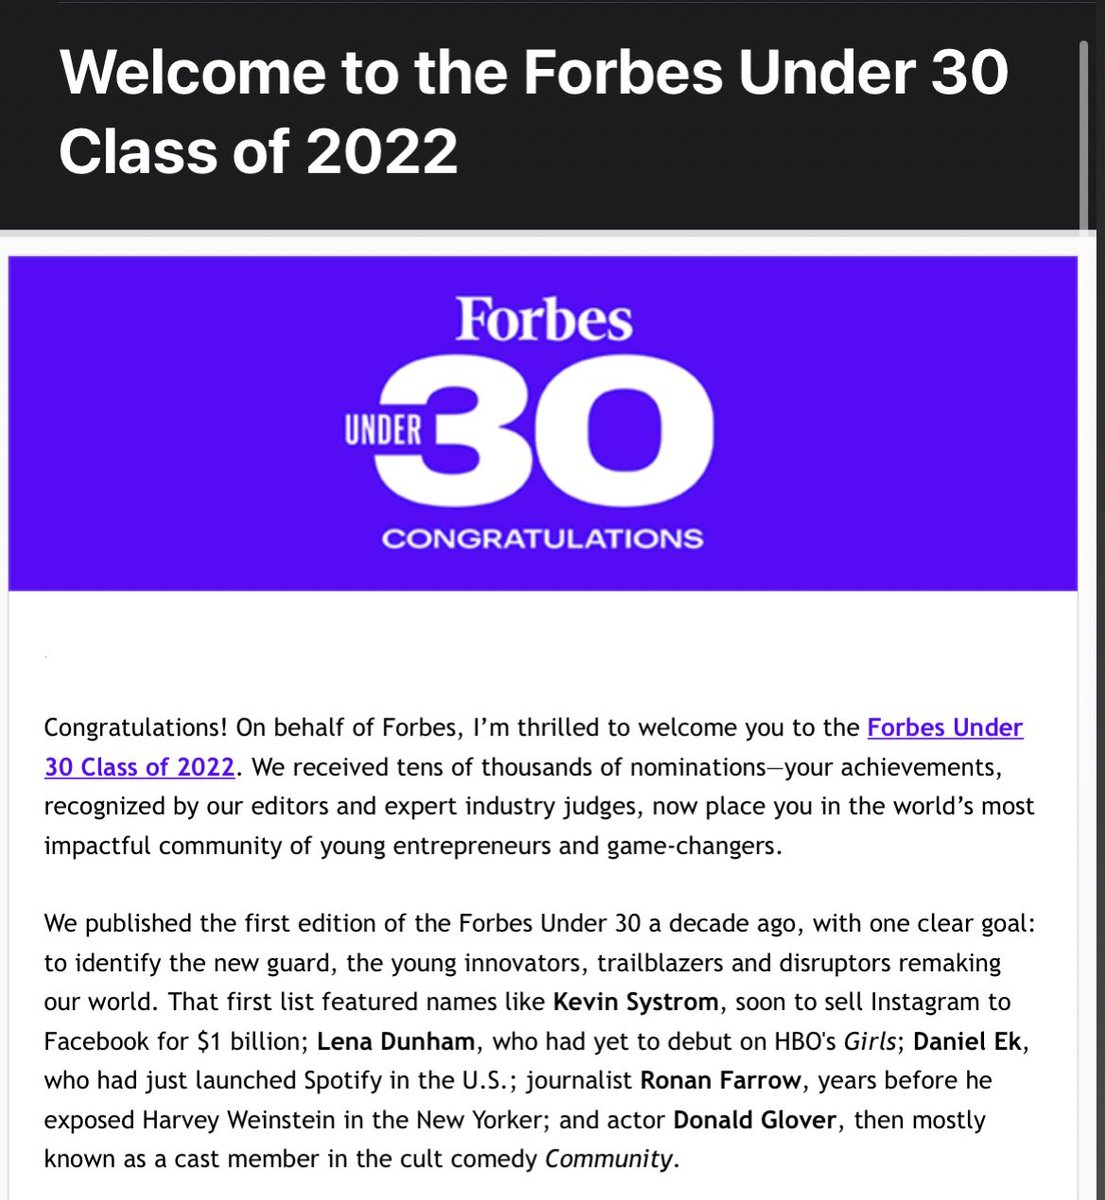 At 10, I was applying for EBT with my family because we didn't have food. At 13, I was sleeping in an office closet because we didn't have a home. At 19, I was working 3 jobs in college to pay our bills.

I'm 24 now, and I'm crying to be selected as a Forbes 30 Under 30 member.